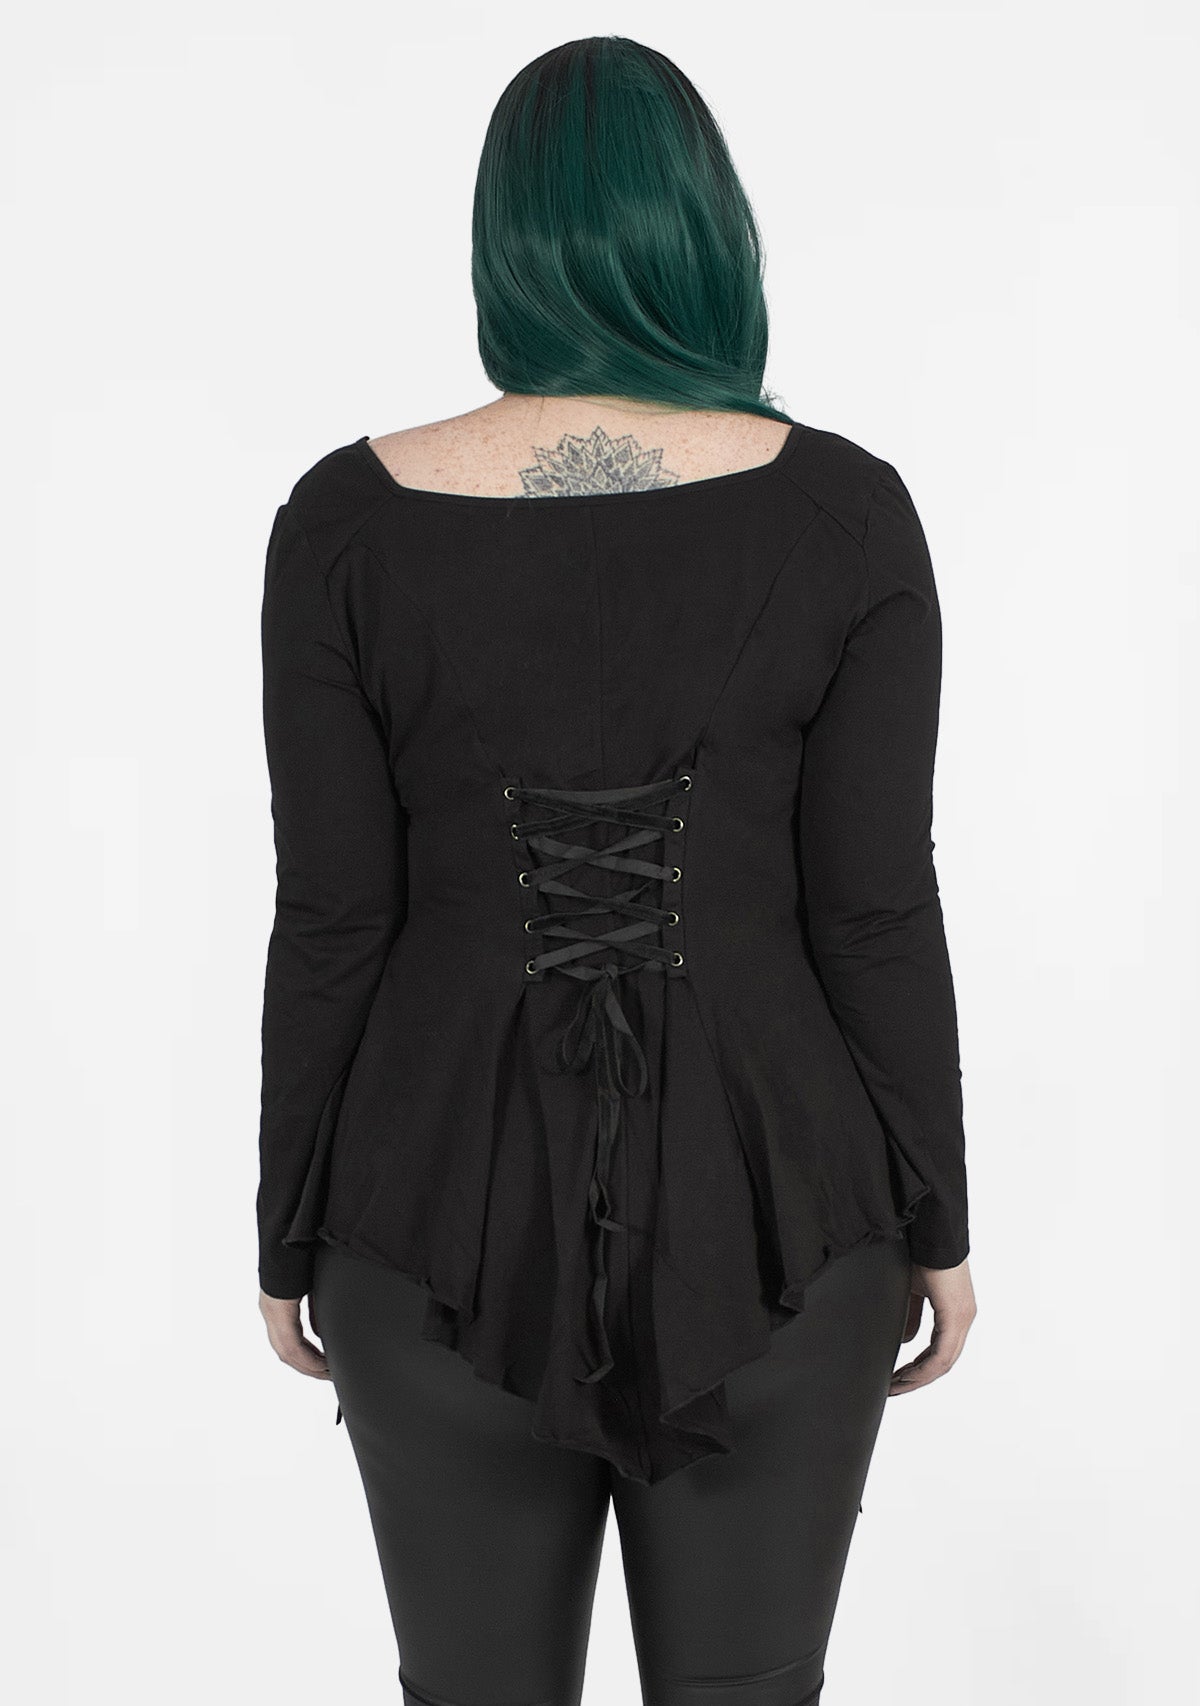 Goth Plus Size Perspective Decal T-shirt